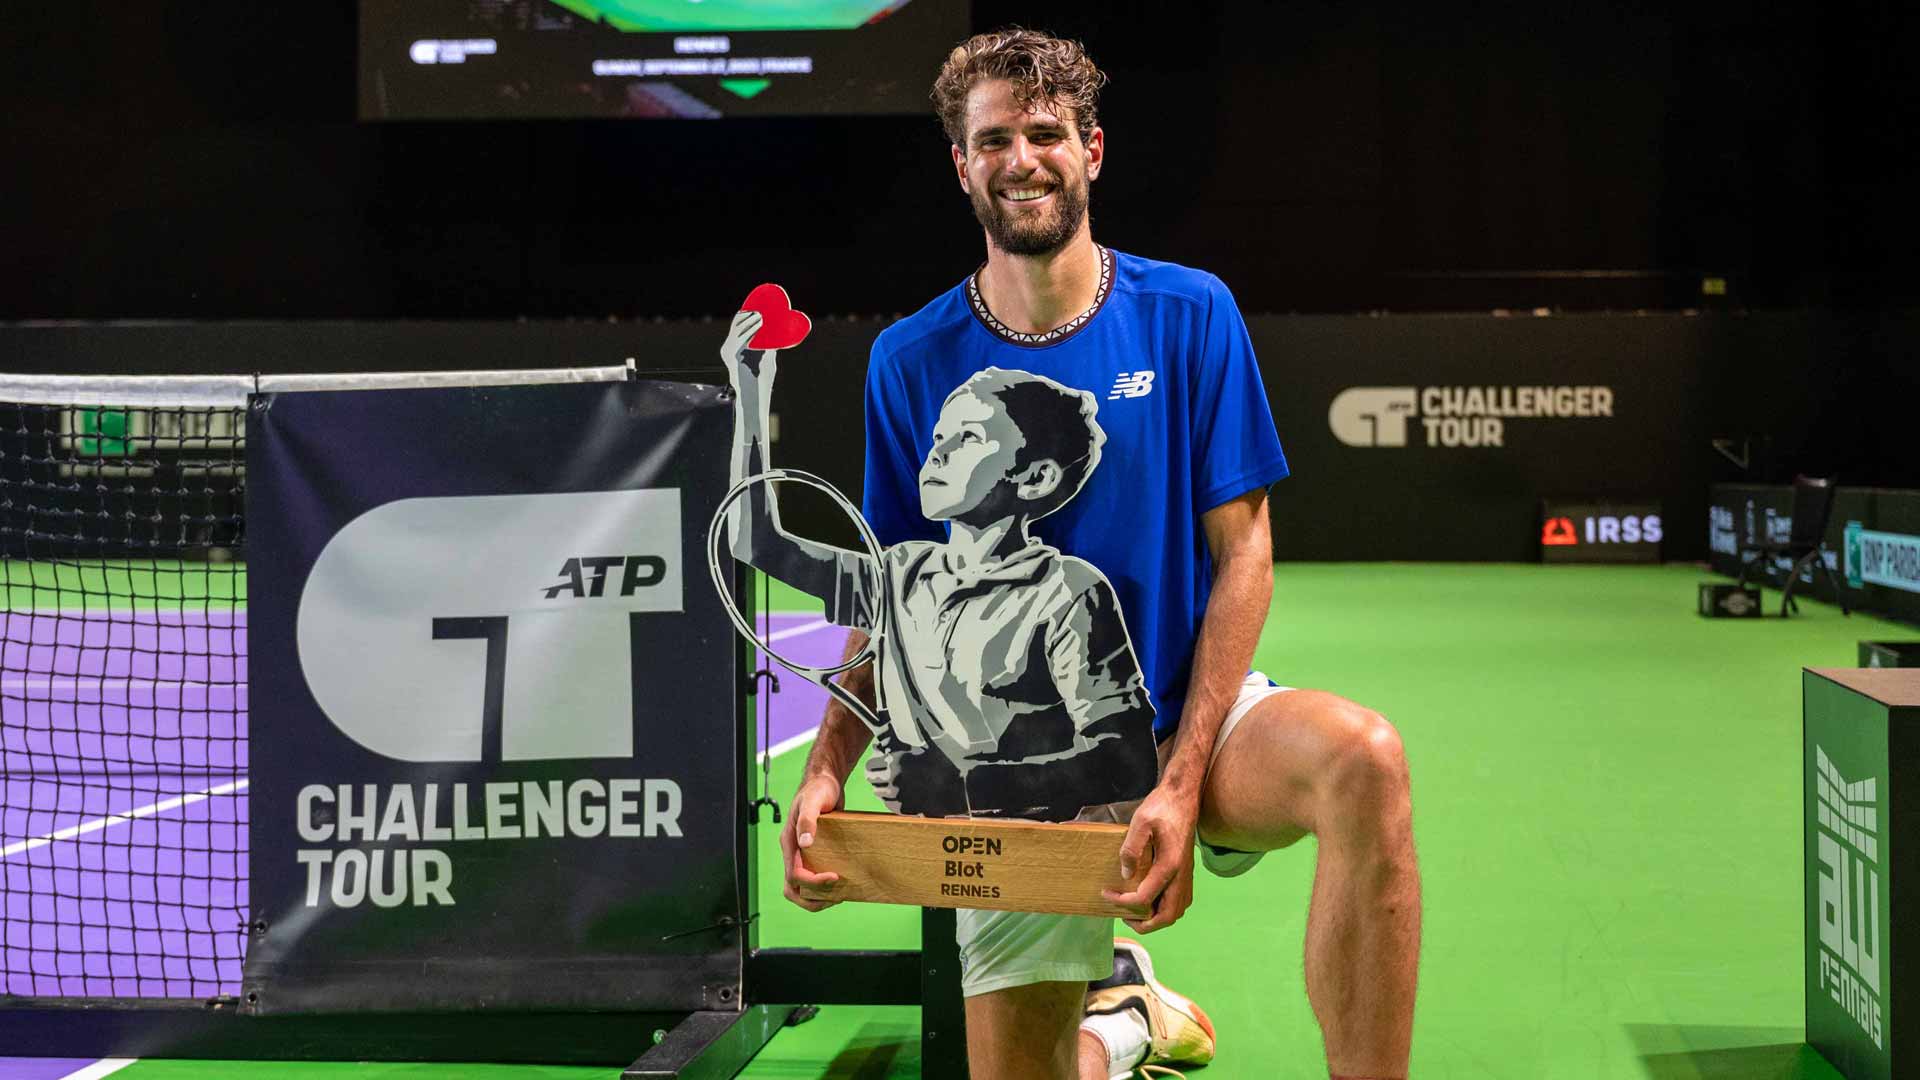 Maxime Cressy wins the Challenger 100 event in Rennes, France.